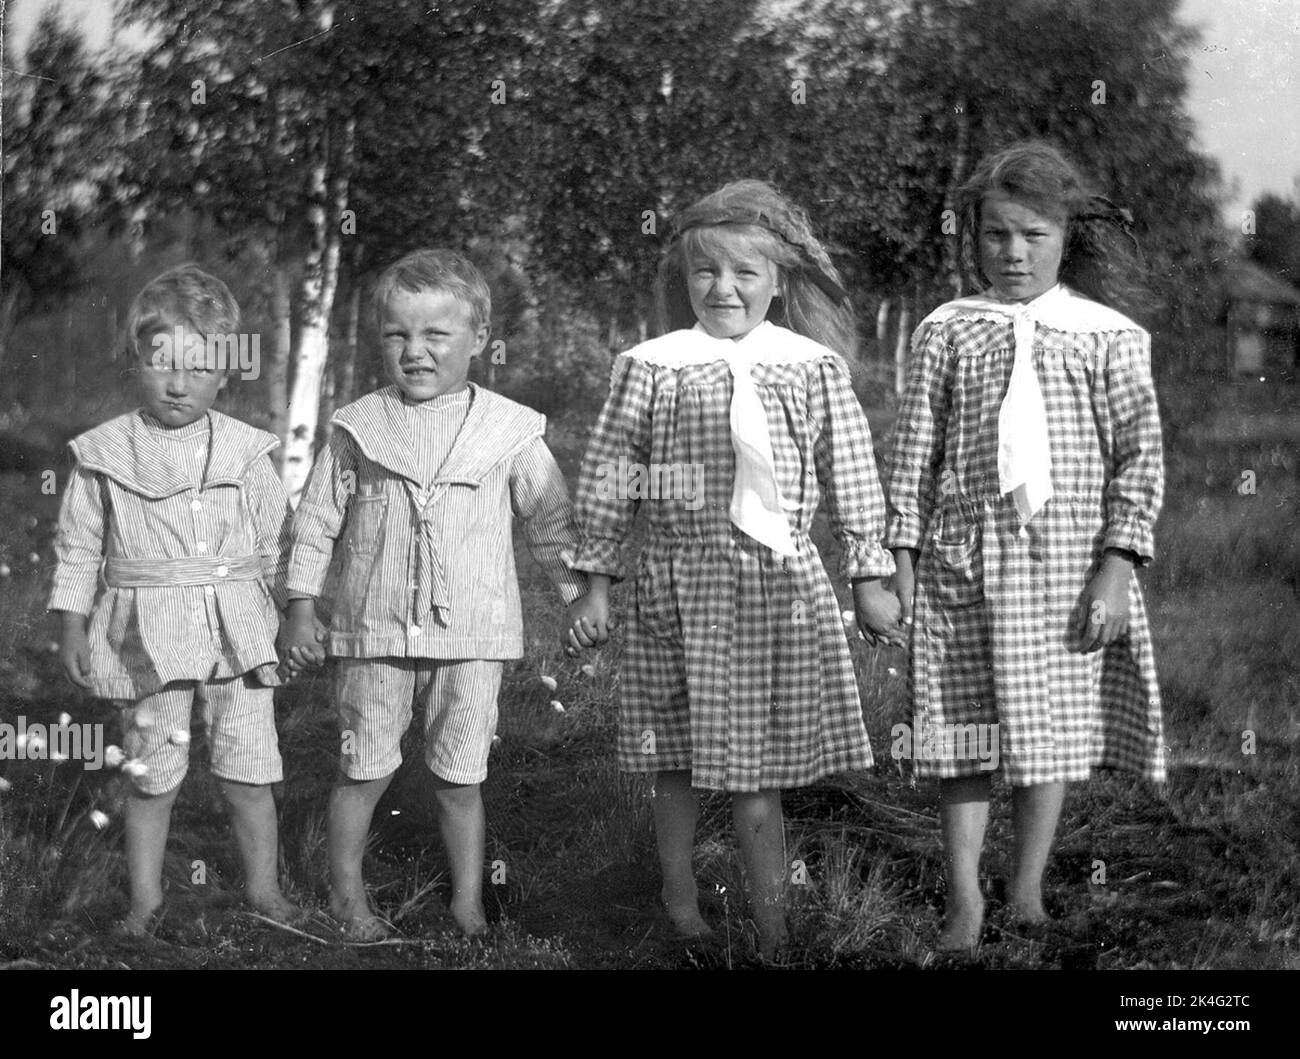 Group picture of four children. Two boys in the same striped costumes with sailor collar and short pants. Two girls in similar checkered dresses with white collars. Nordic Stock Photo